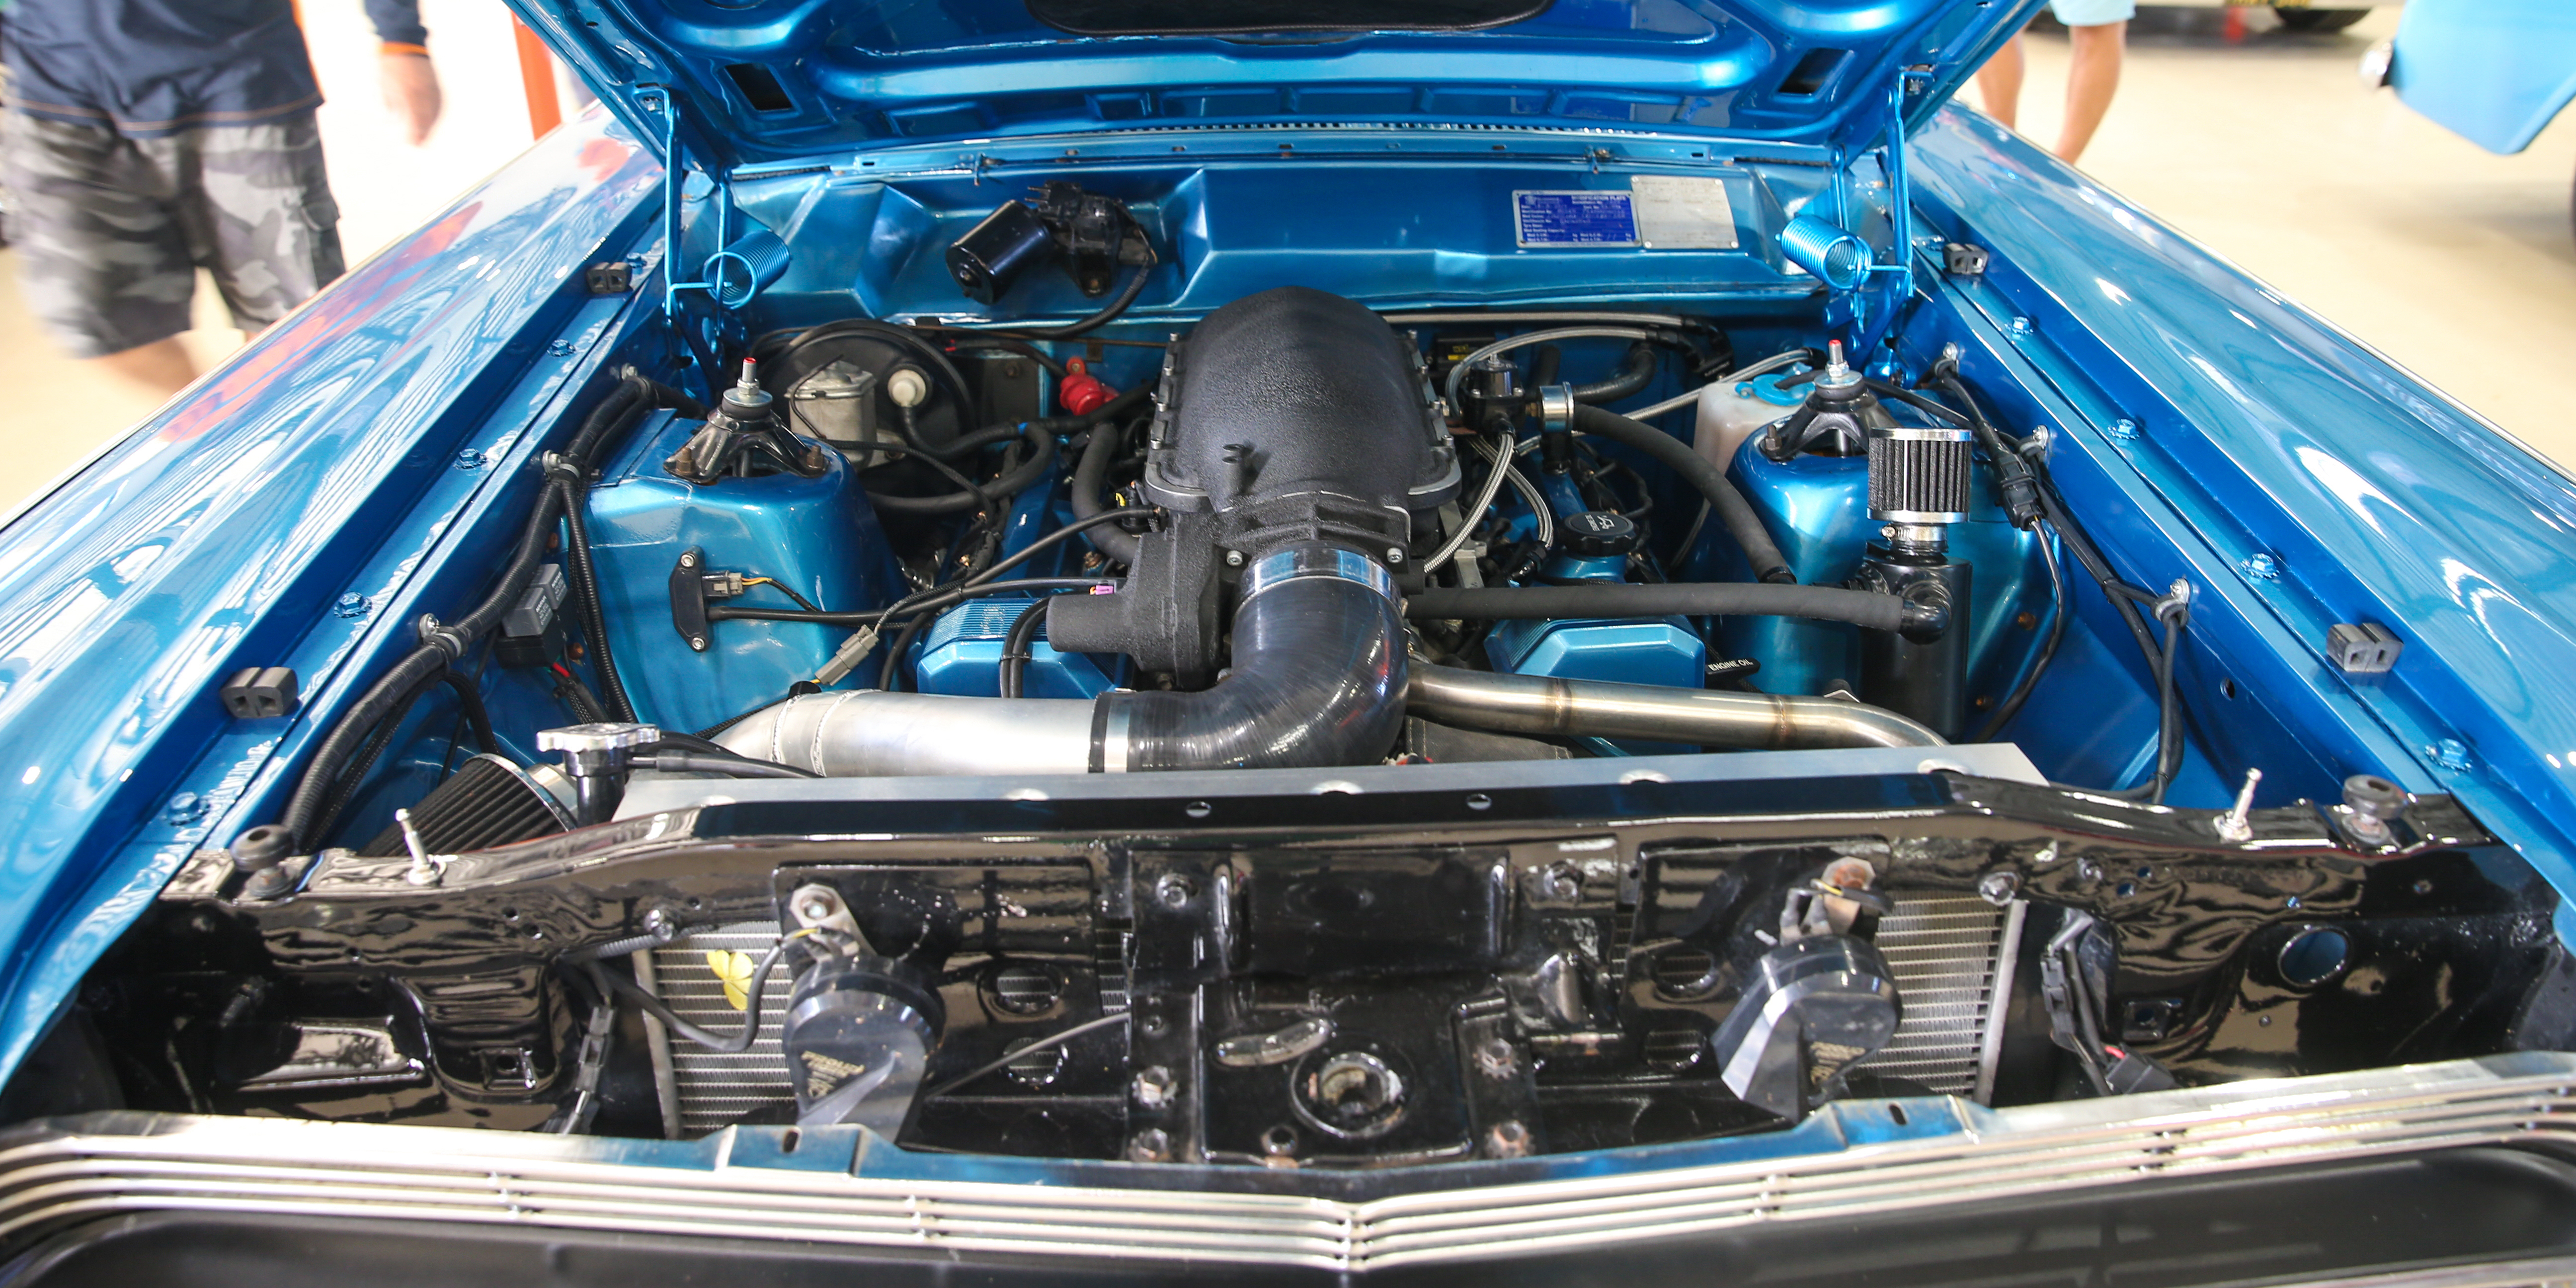 Looking under the hood of a classic car